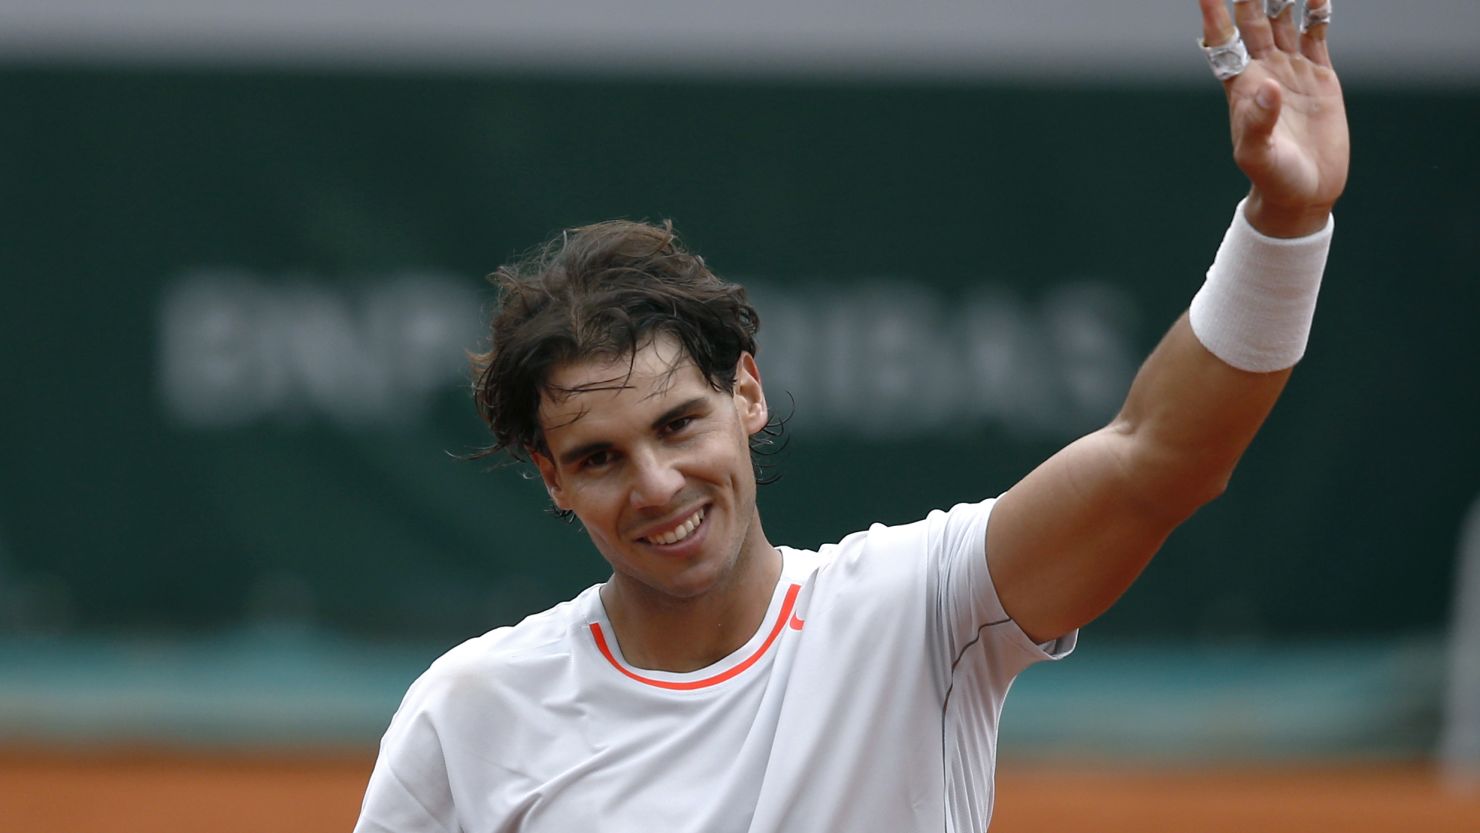 Rafael Nadal was all smiles on court after his win at the French Open on Friday, but he wasn't so happy later.  